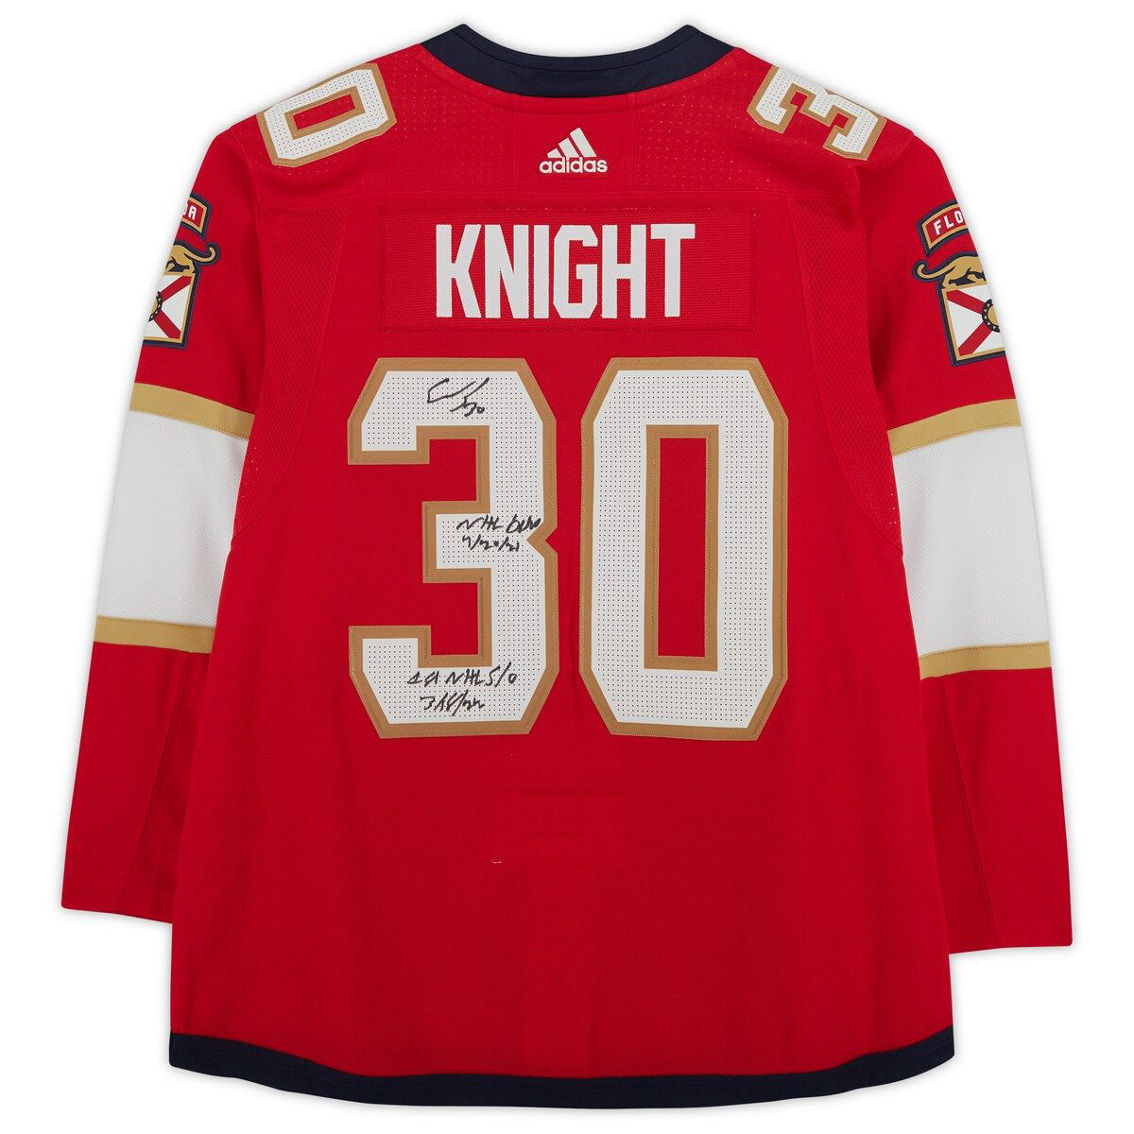 Fanatics Authentic Spencer Knight Florida Panthers Autographed Red Adidas Authentic Jersey with Multiple Inscriptions - Image 3 of 4